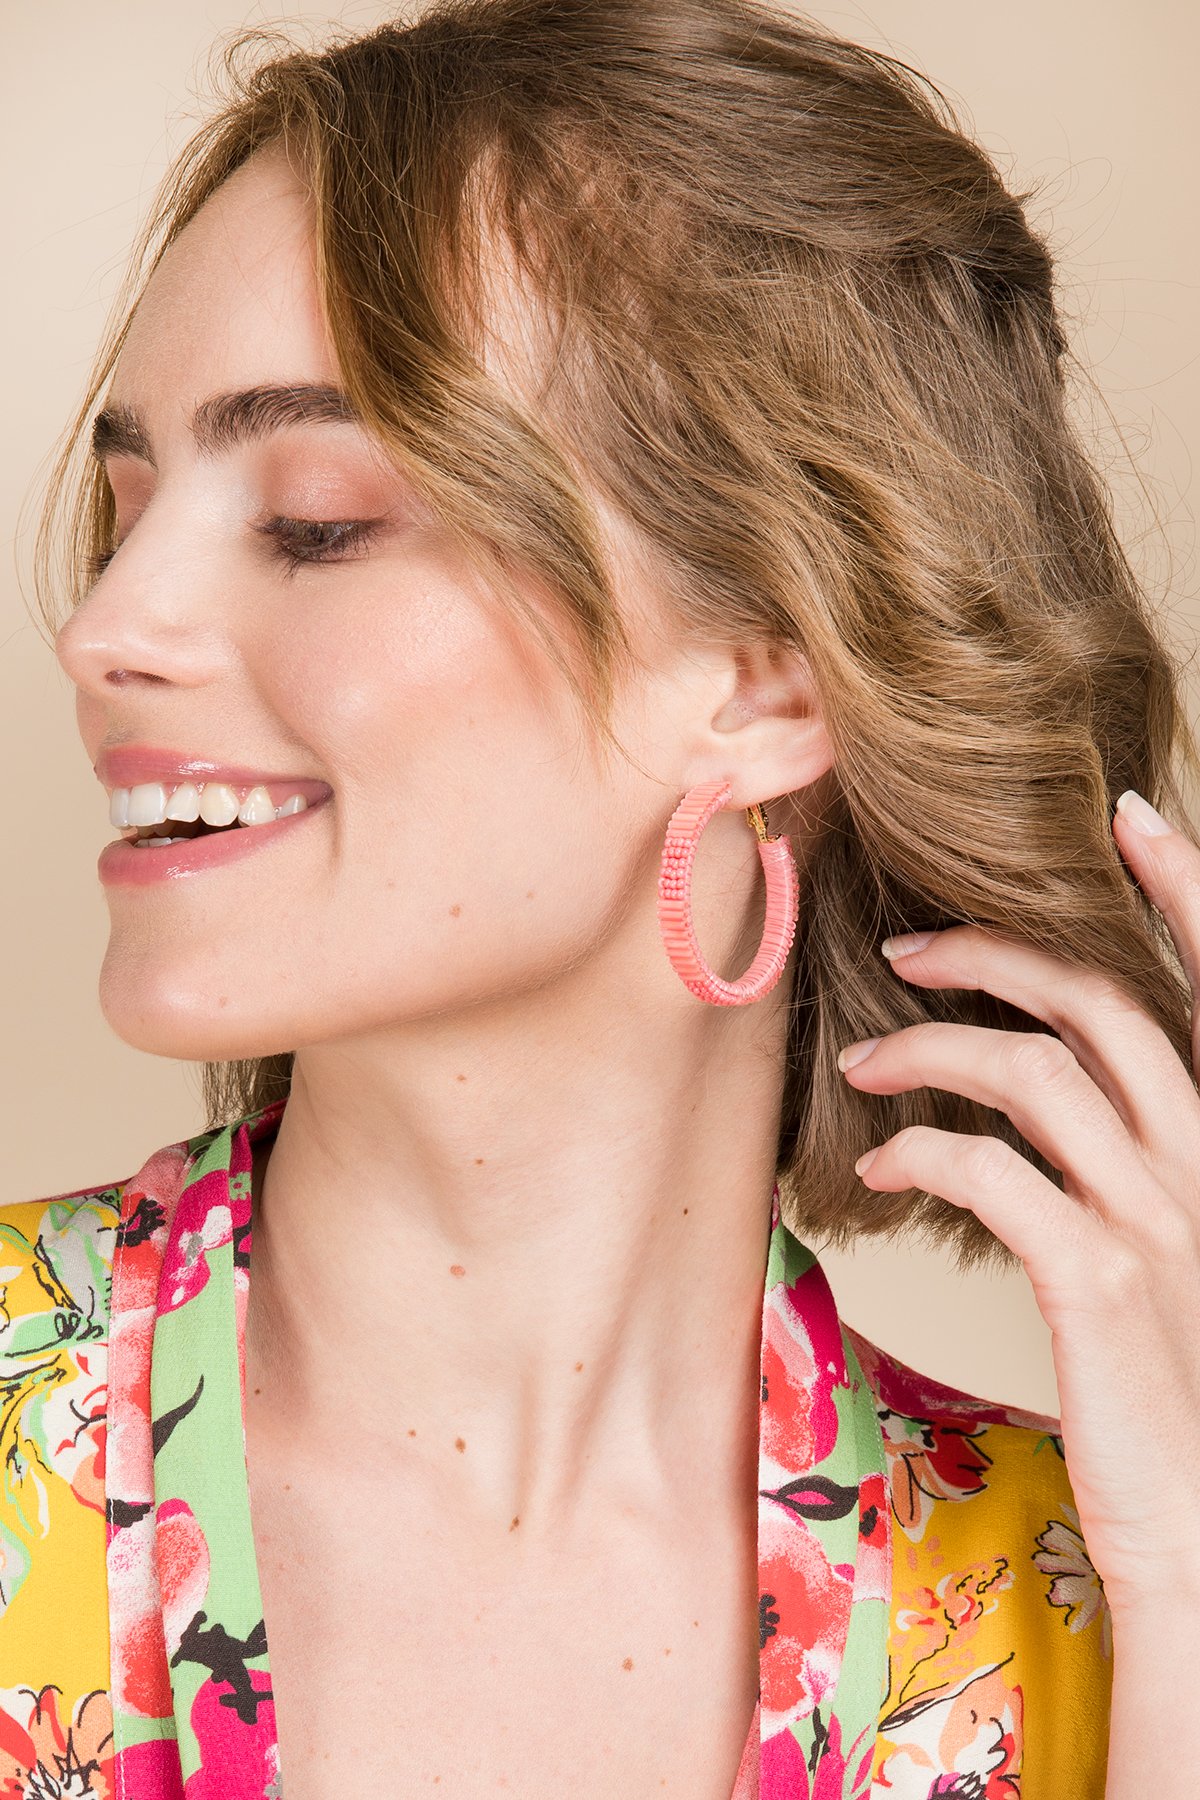 Earring Styles That Everyone Should Have In Their Collection